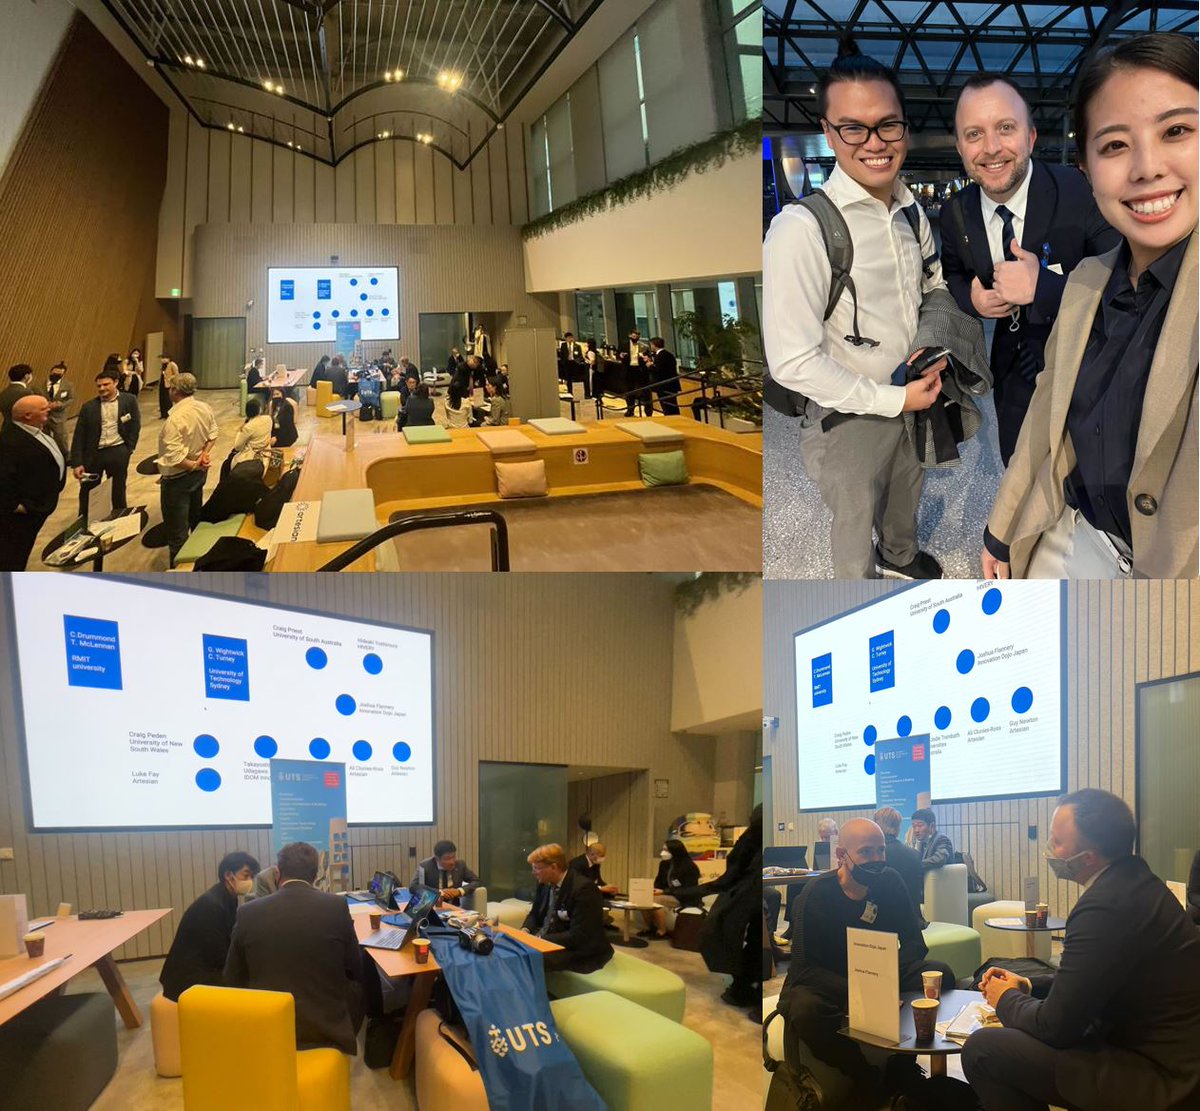 1/ It has been a great week for Australia-Japan relations, particularly related to innovation as the very first event for the Australia-Japan Innovation Alliance happened on Thursday evening at the impressive Google Japan HQ in Shibuya.